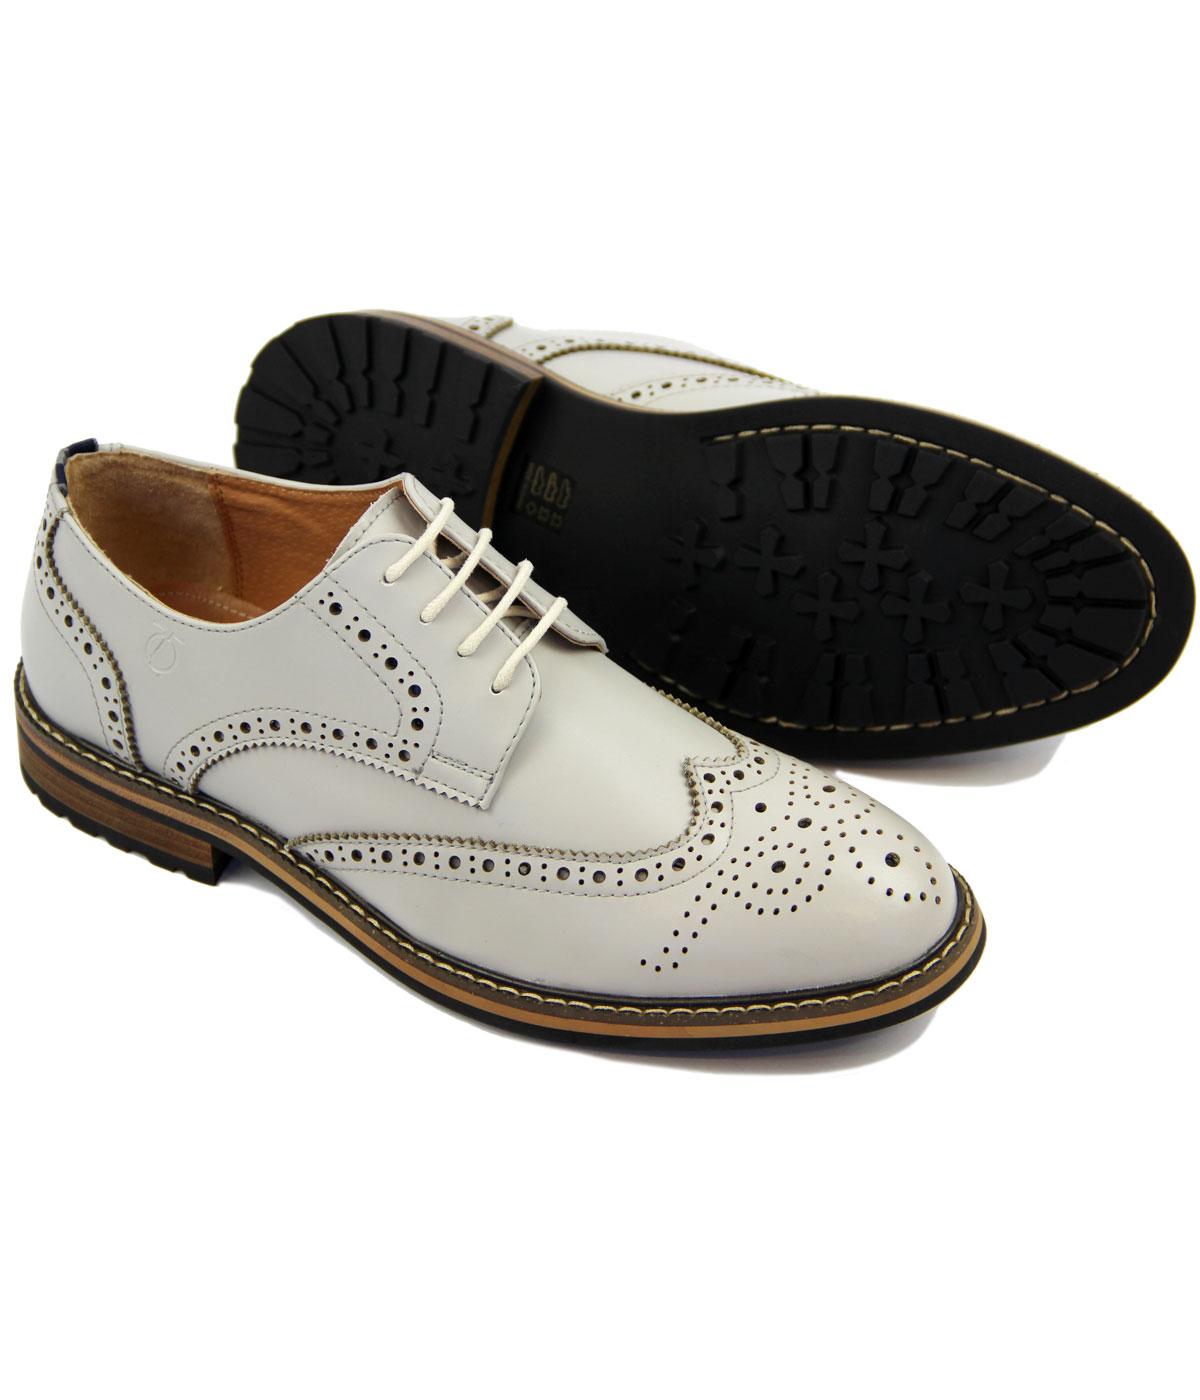 PETER WERTH Turnmill Retro 60s Mod Derby Brogue Shoes in Grey